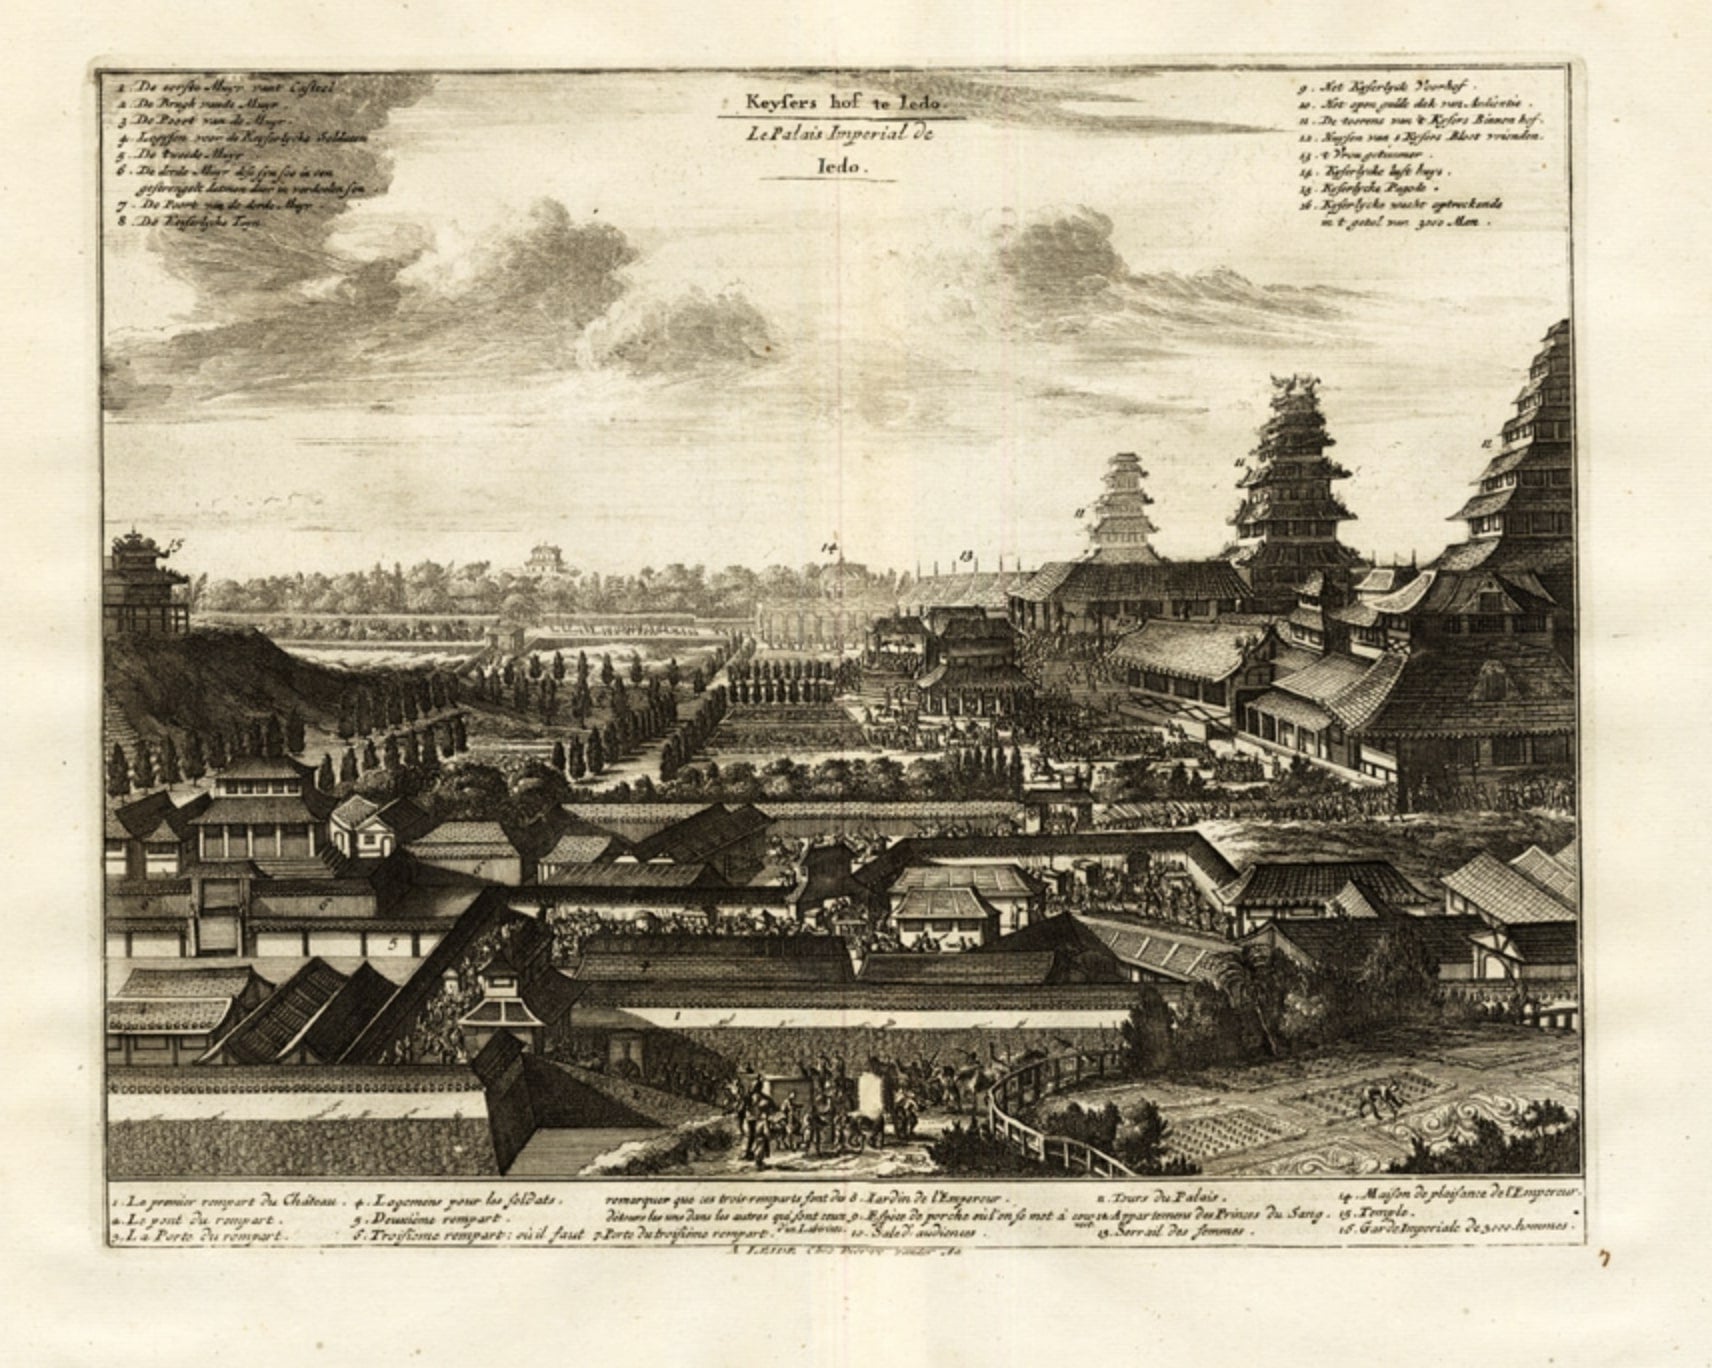 Antique Print of the Imperial Palace in Edo or Tokyo in Japan, c.1725